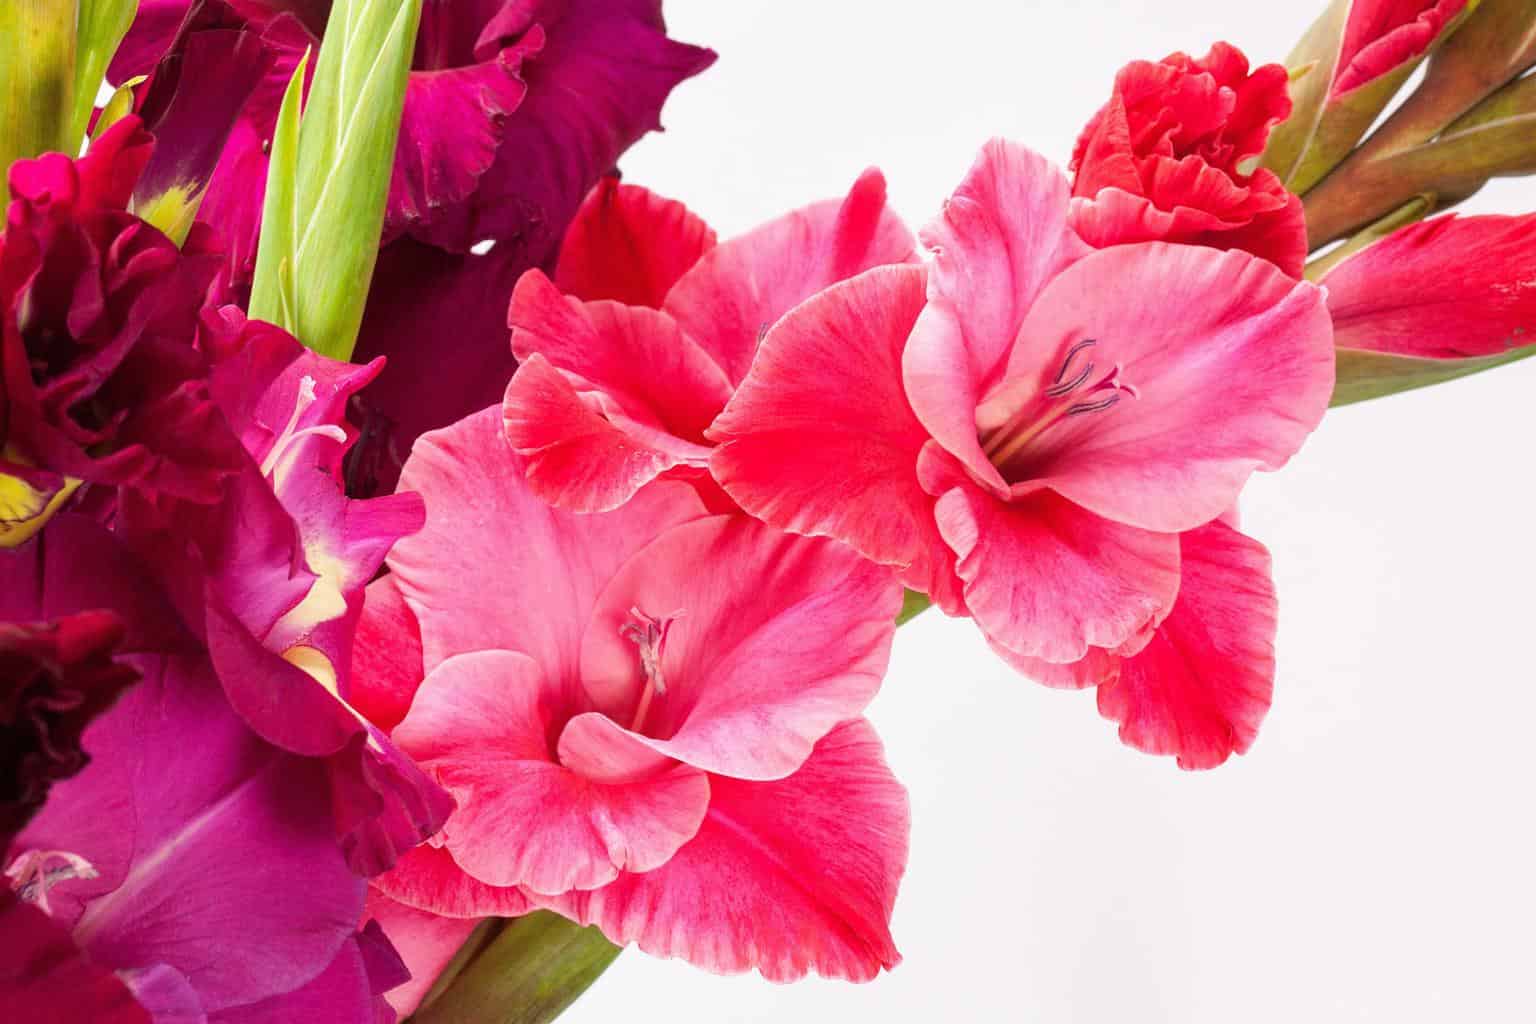 Gladiolus Meaning and Symbolism